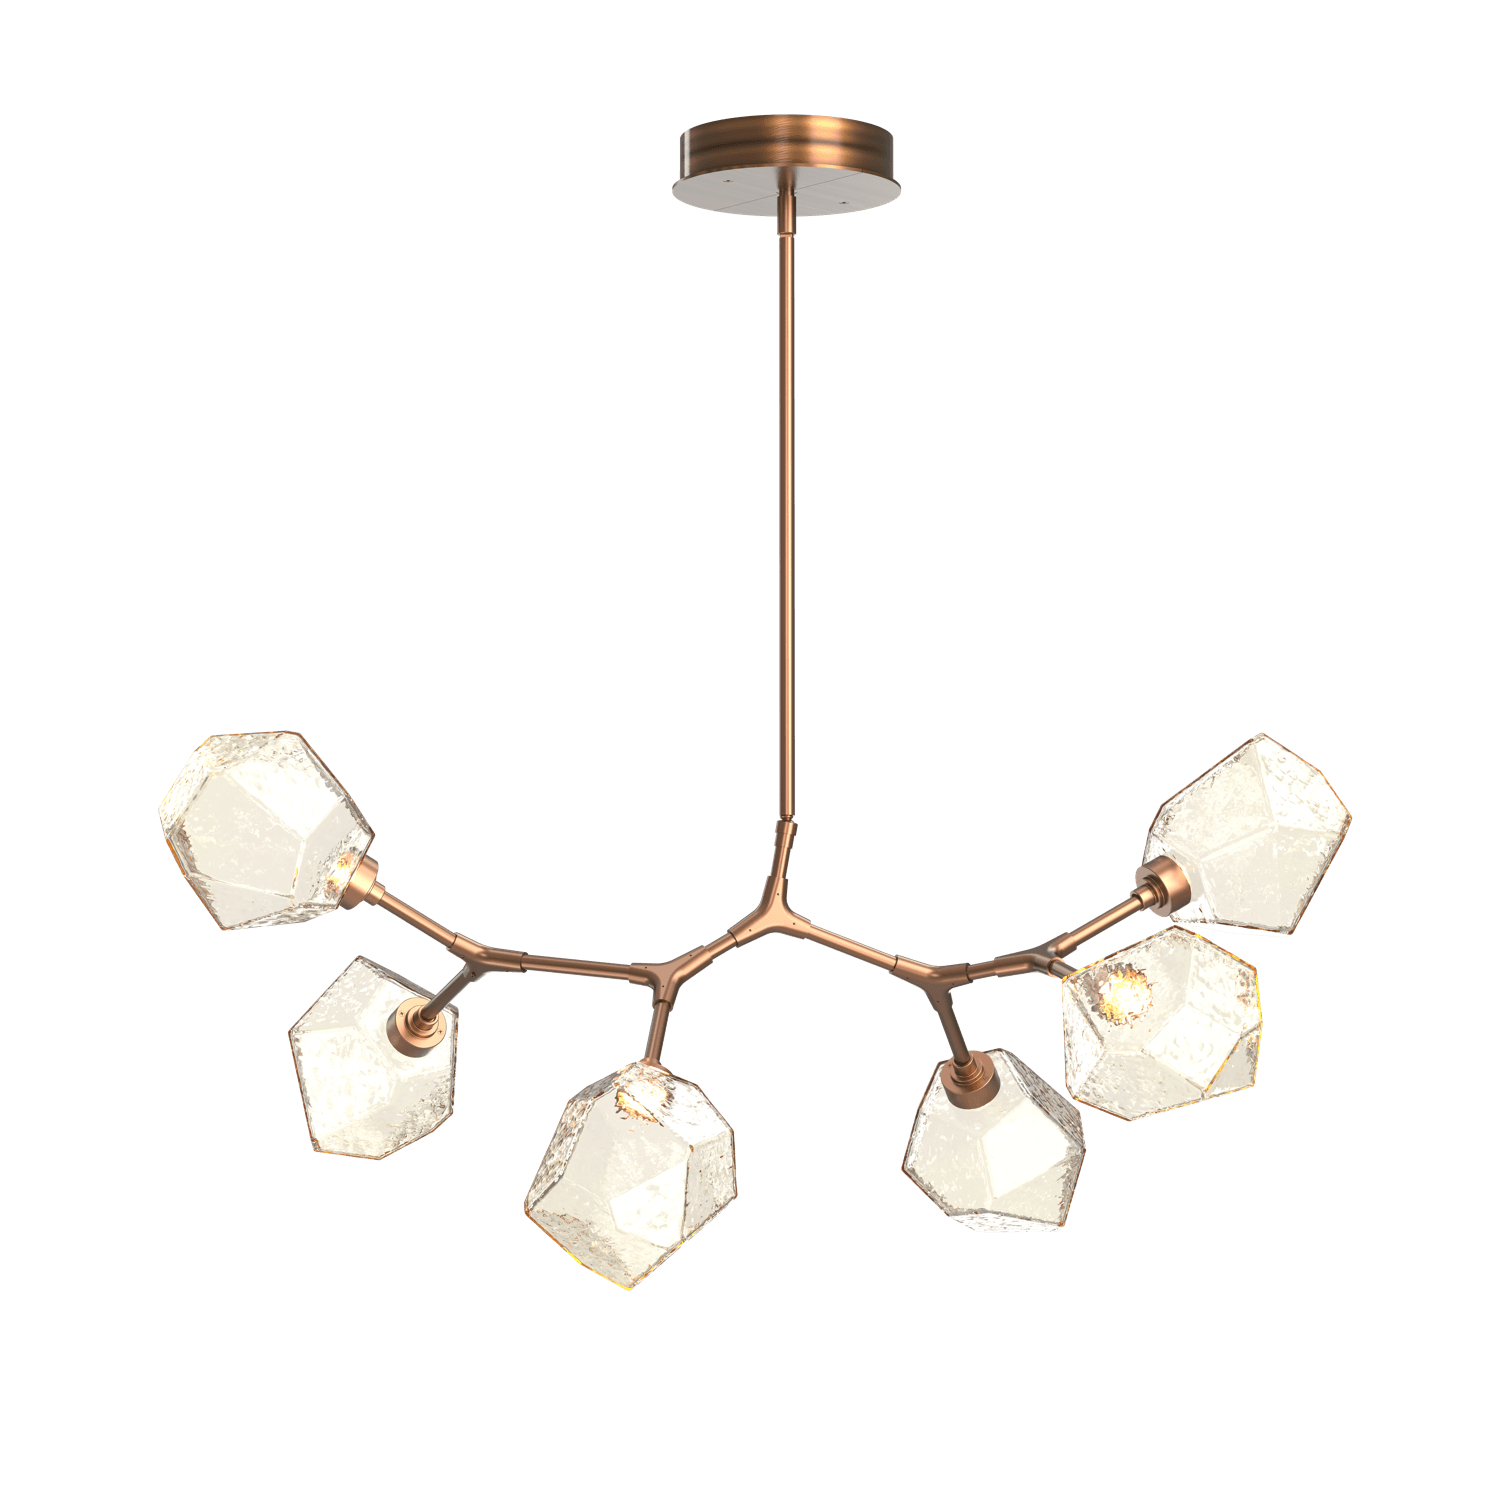 PLB0039-BA-RB-A-Hammerton-Studio-Gem-6-light-modern-branch-chandelier-with-oil-rubbed-bronze-finish-and-amber-blown-glass-shades-and-LED-lamping